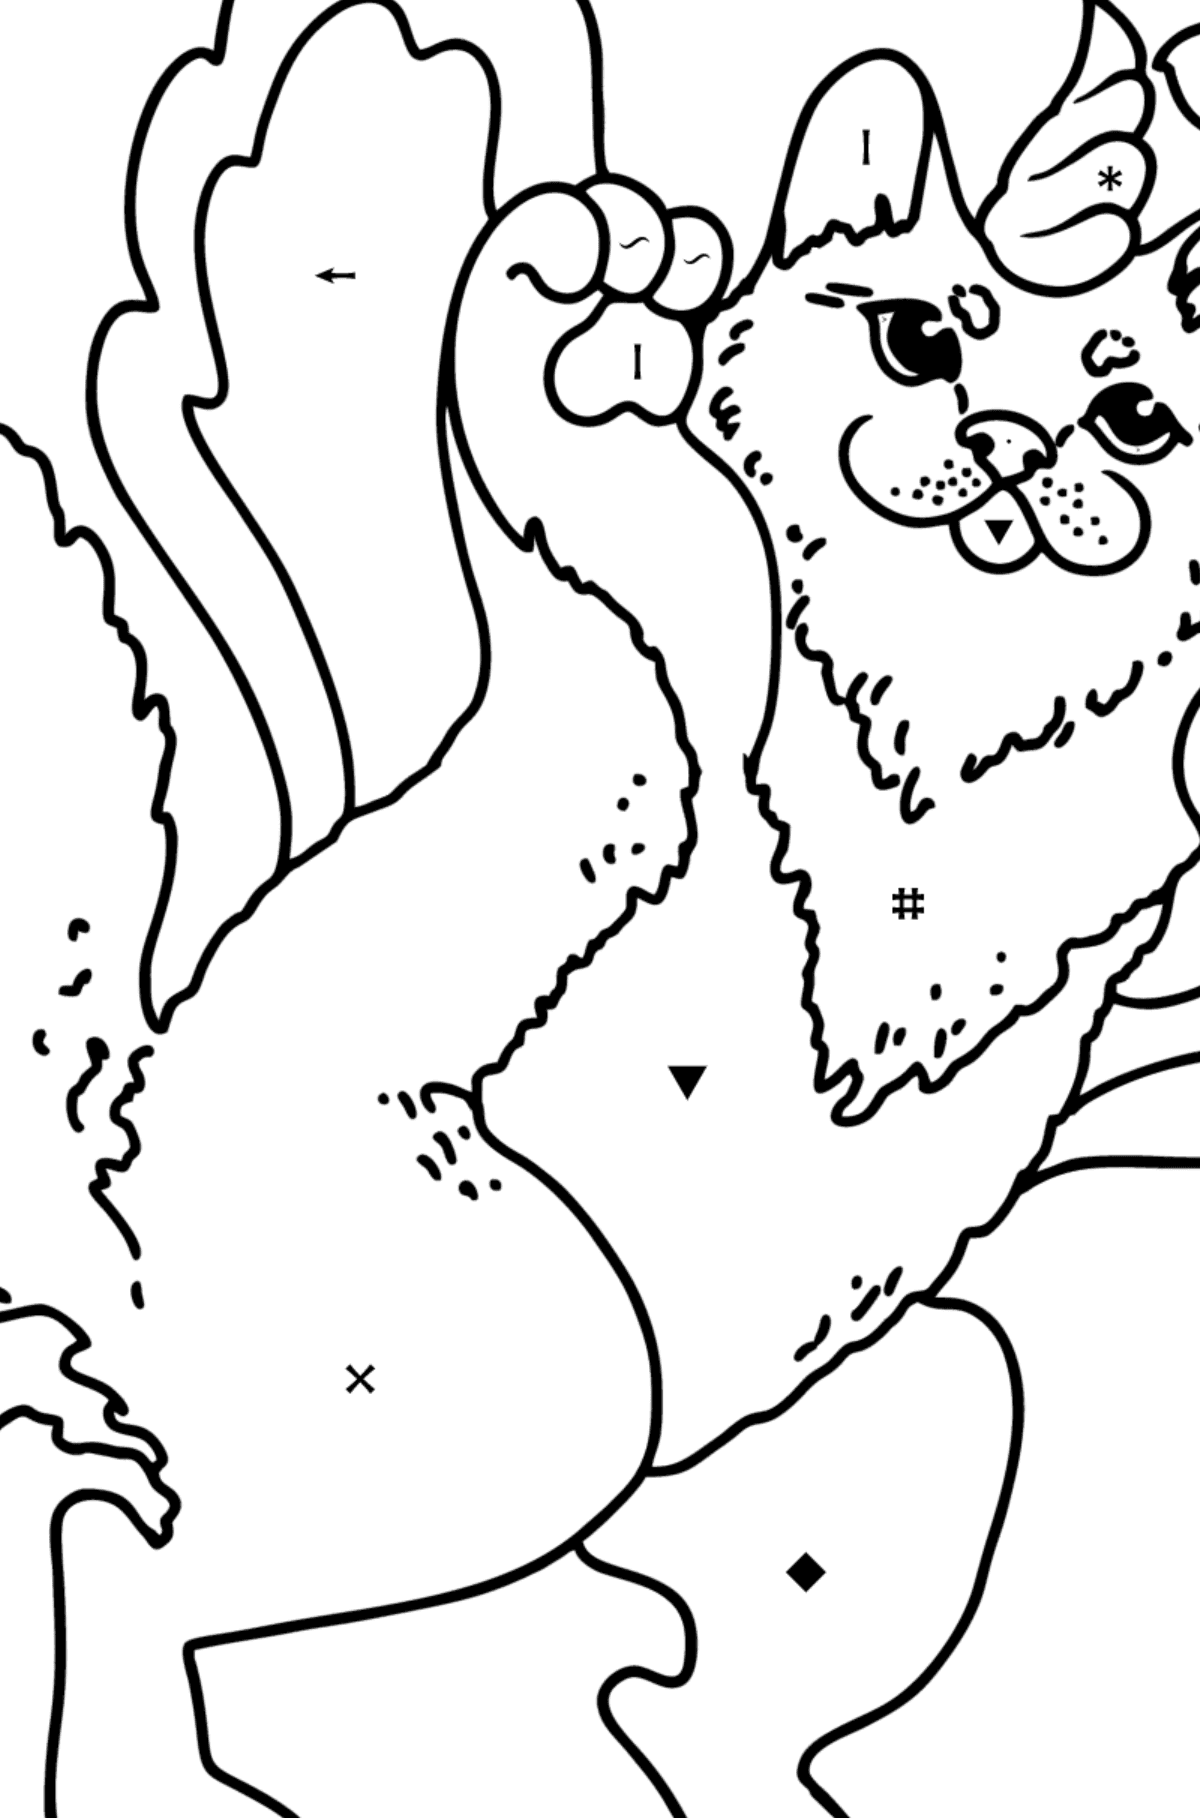 Cat Unicorn coloring page - Coloring by Symbols for Kids